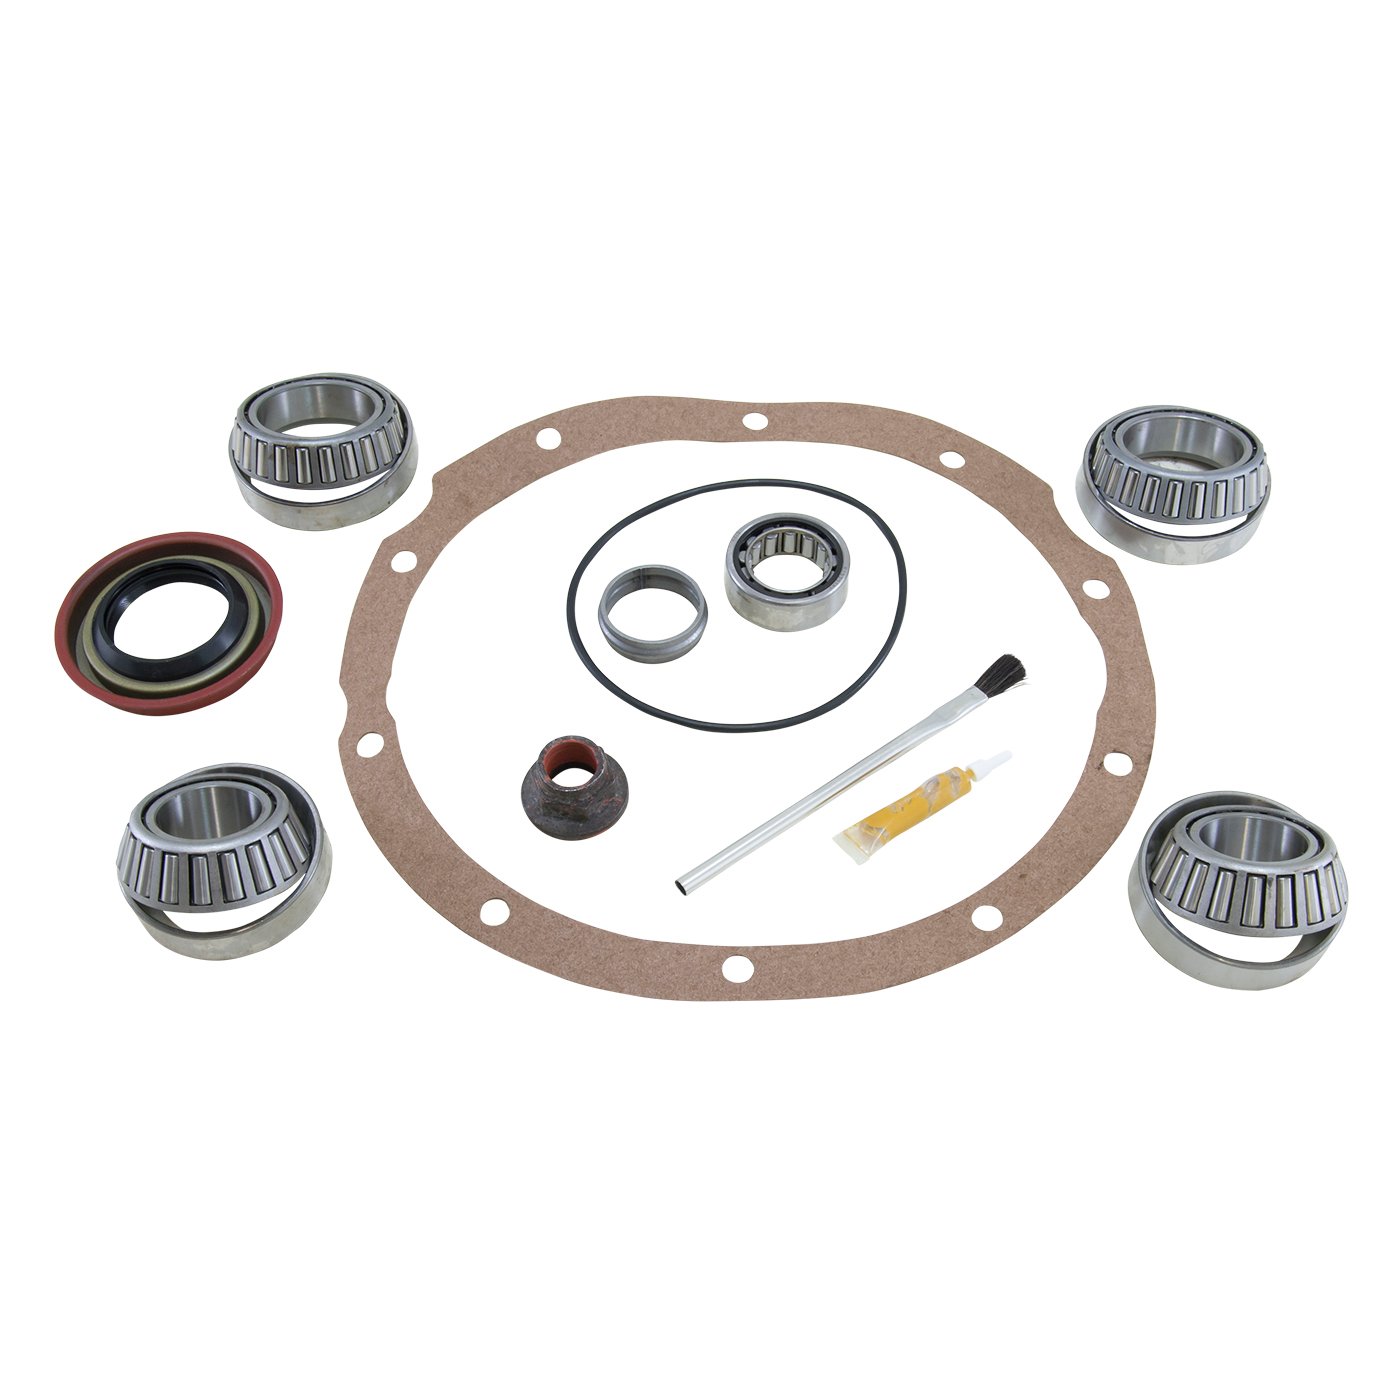 Bearing Install Kit For Ford 9 in. Differential, Lm501310 Bearings